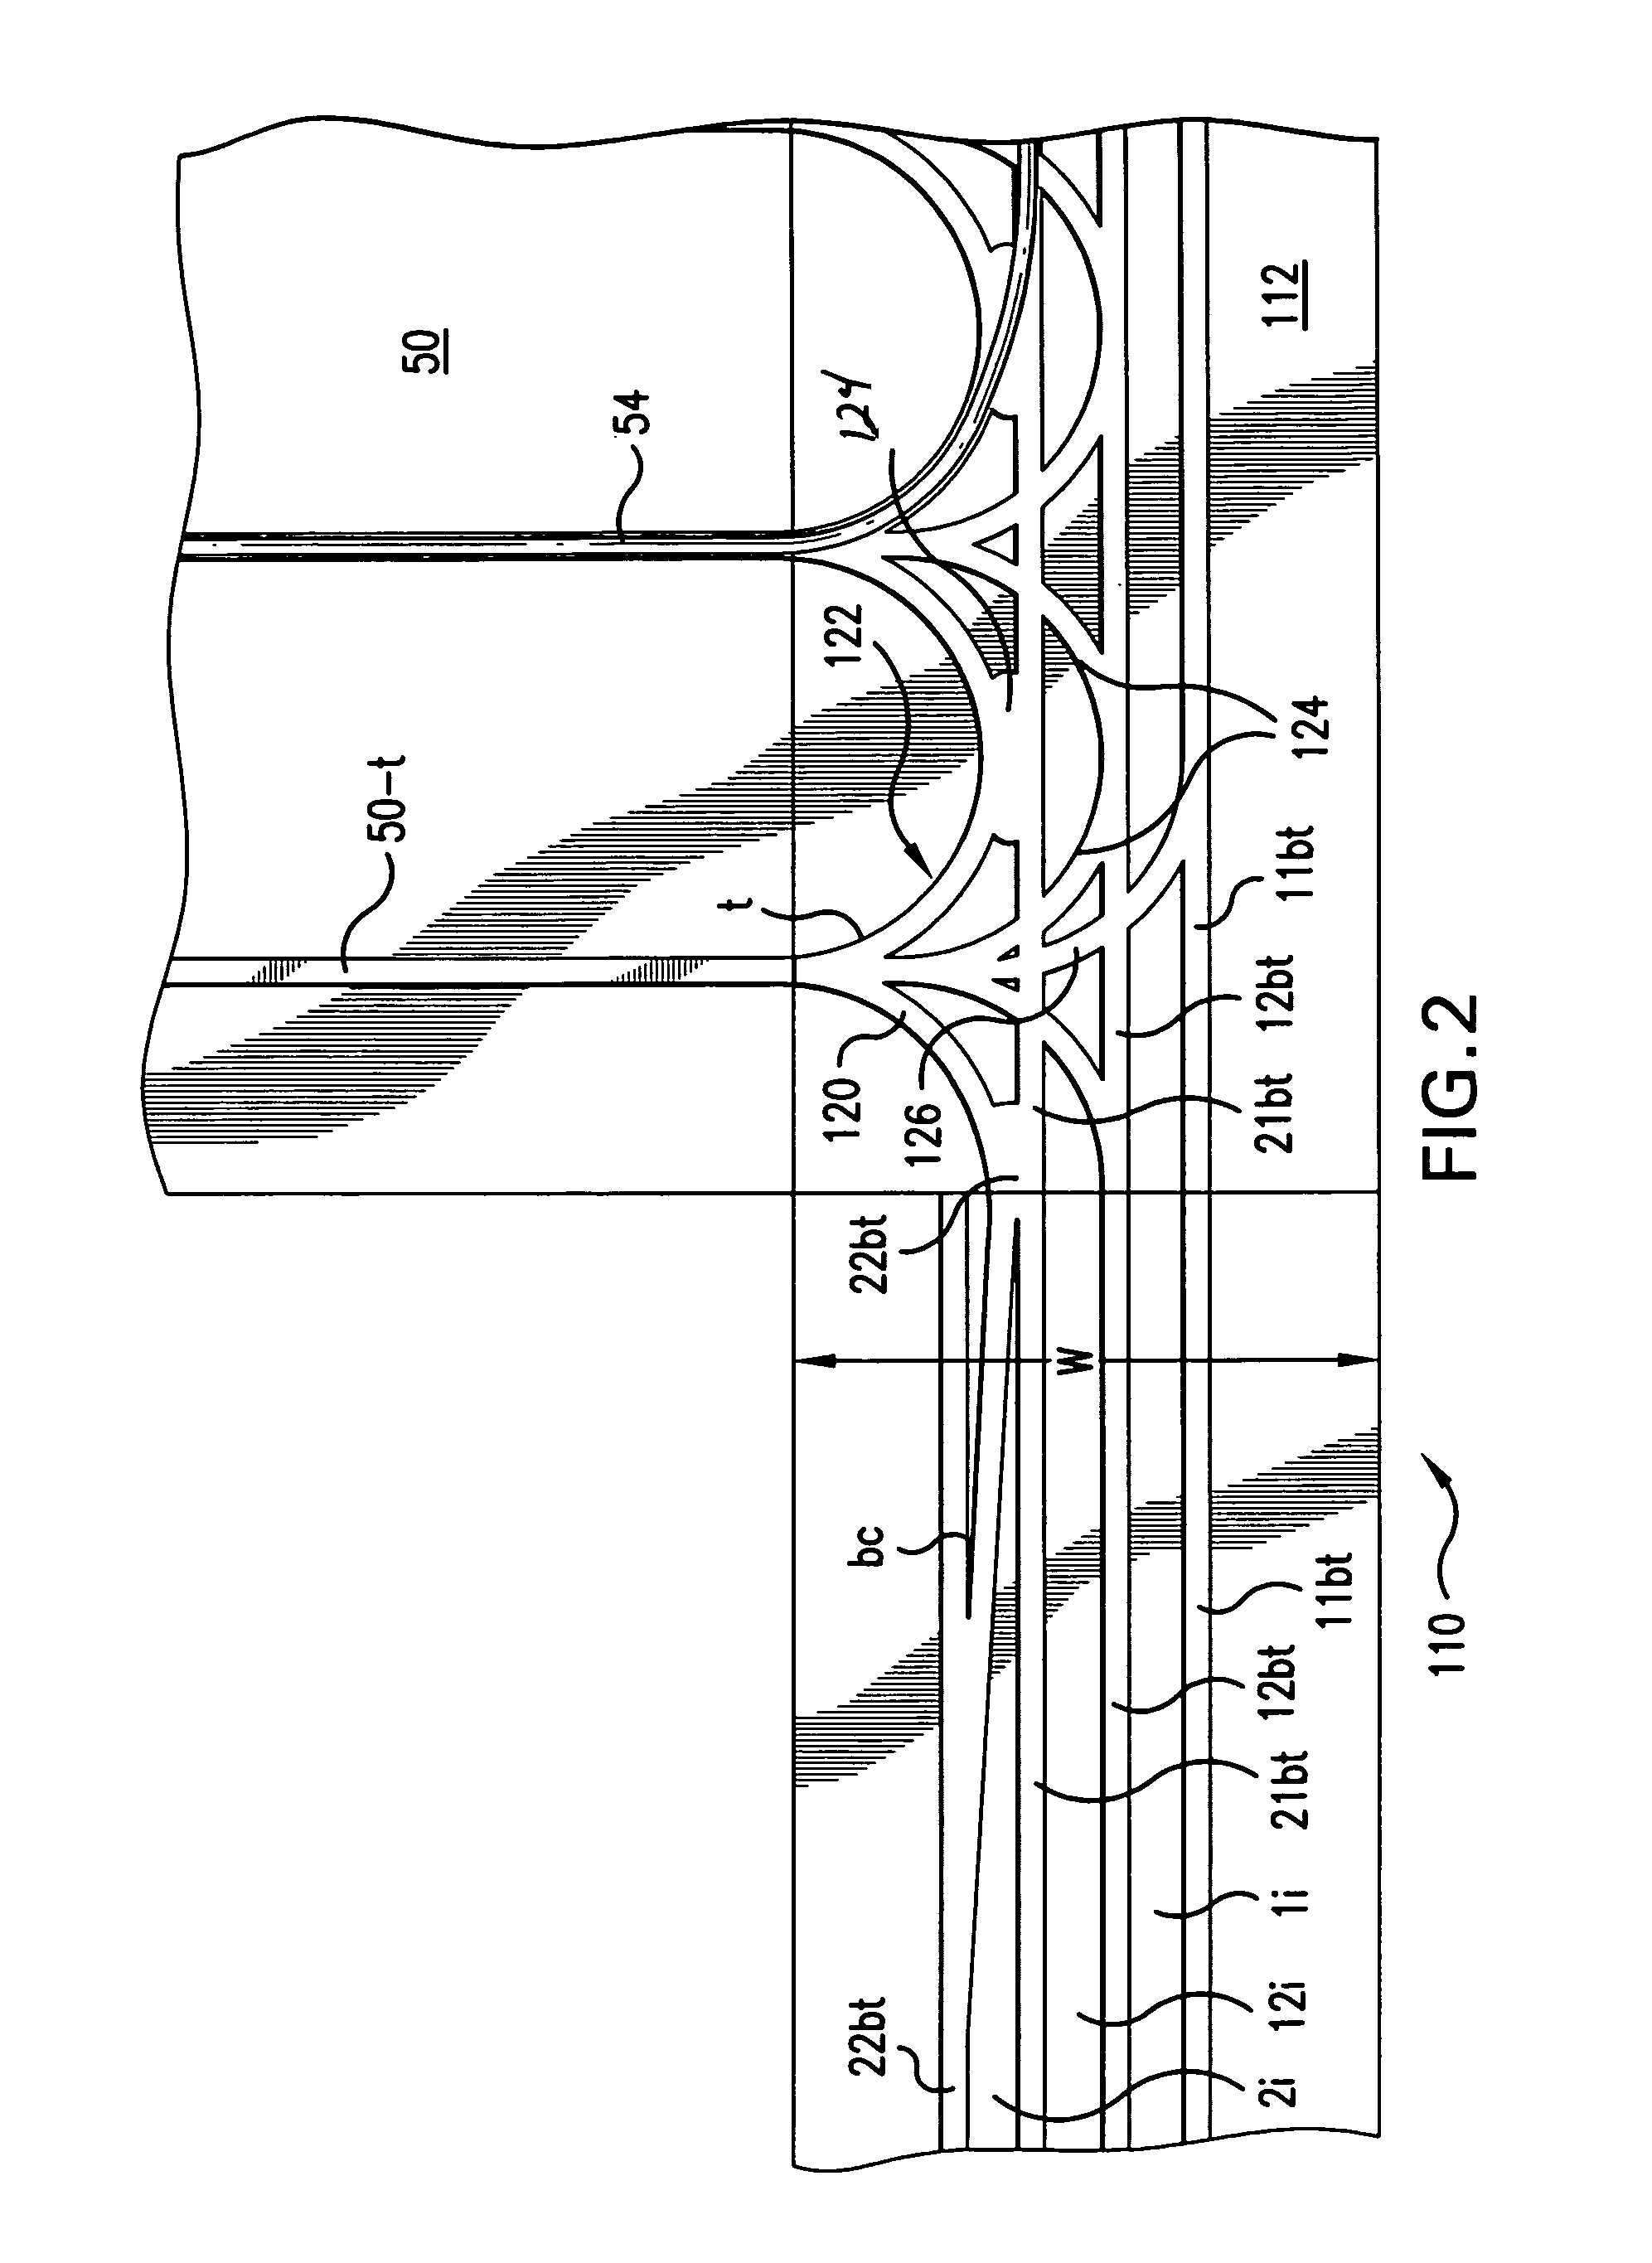 Radiant heating/cooling tubing substrate with in plane bus